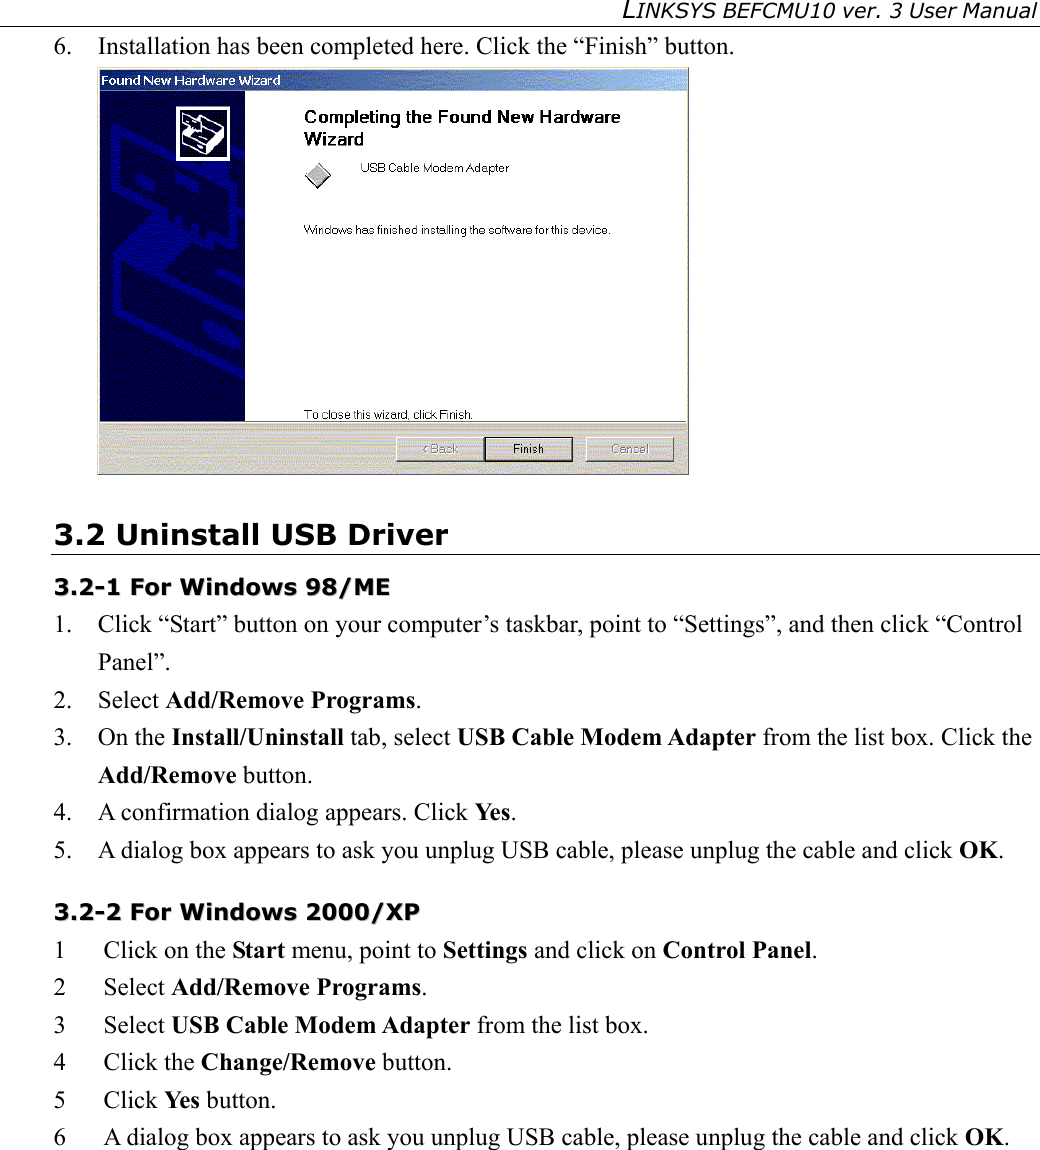 LINKSYS BEFCMU10 ver. 3 User Manual   6.  Installation has been completed here. Click the “Finish” button.  3.2 Uninstall USB Driver 33..22--11  FFoorr  WWiinnddoowwss  9988//MMEE    1.  Click “Start” button on your computer’s taskbar, point to “Settings”, and then click “Control Panel”. 2. Select Add/Remove Programs. 3. On the Install/Uninstall tab, select USB Cable Modem Adapter from the list box. Click the Add/Remove button. 4.  A confirmation dialog appears. Click Ye s . 5.  A dialog box appears to ask you unplug USB cable, please unplug the cable and click OK. 33..22--22  FFoorr  WWiinnddoowwss  22000000//XXPP  1  Click on the Start menu, point to Settings and click on Control Panel. 2 Select Add/Remove Programs. 3 Select USB Cable Modem Adapter from the list box. 4 Click the Change/Remove button. 5 Click Ye s  button. 6  A dialog box appears to ask you unplug USB cable, please unplug the cable and click OK.  